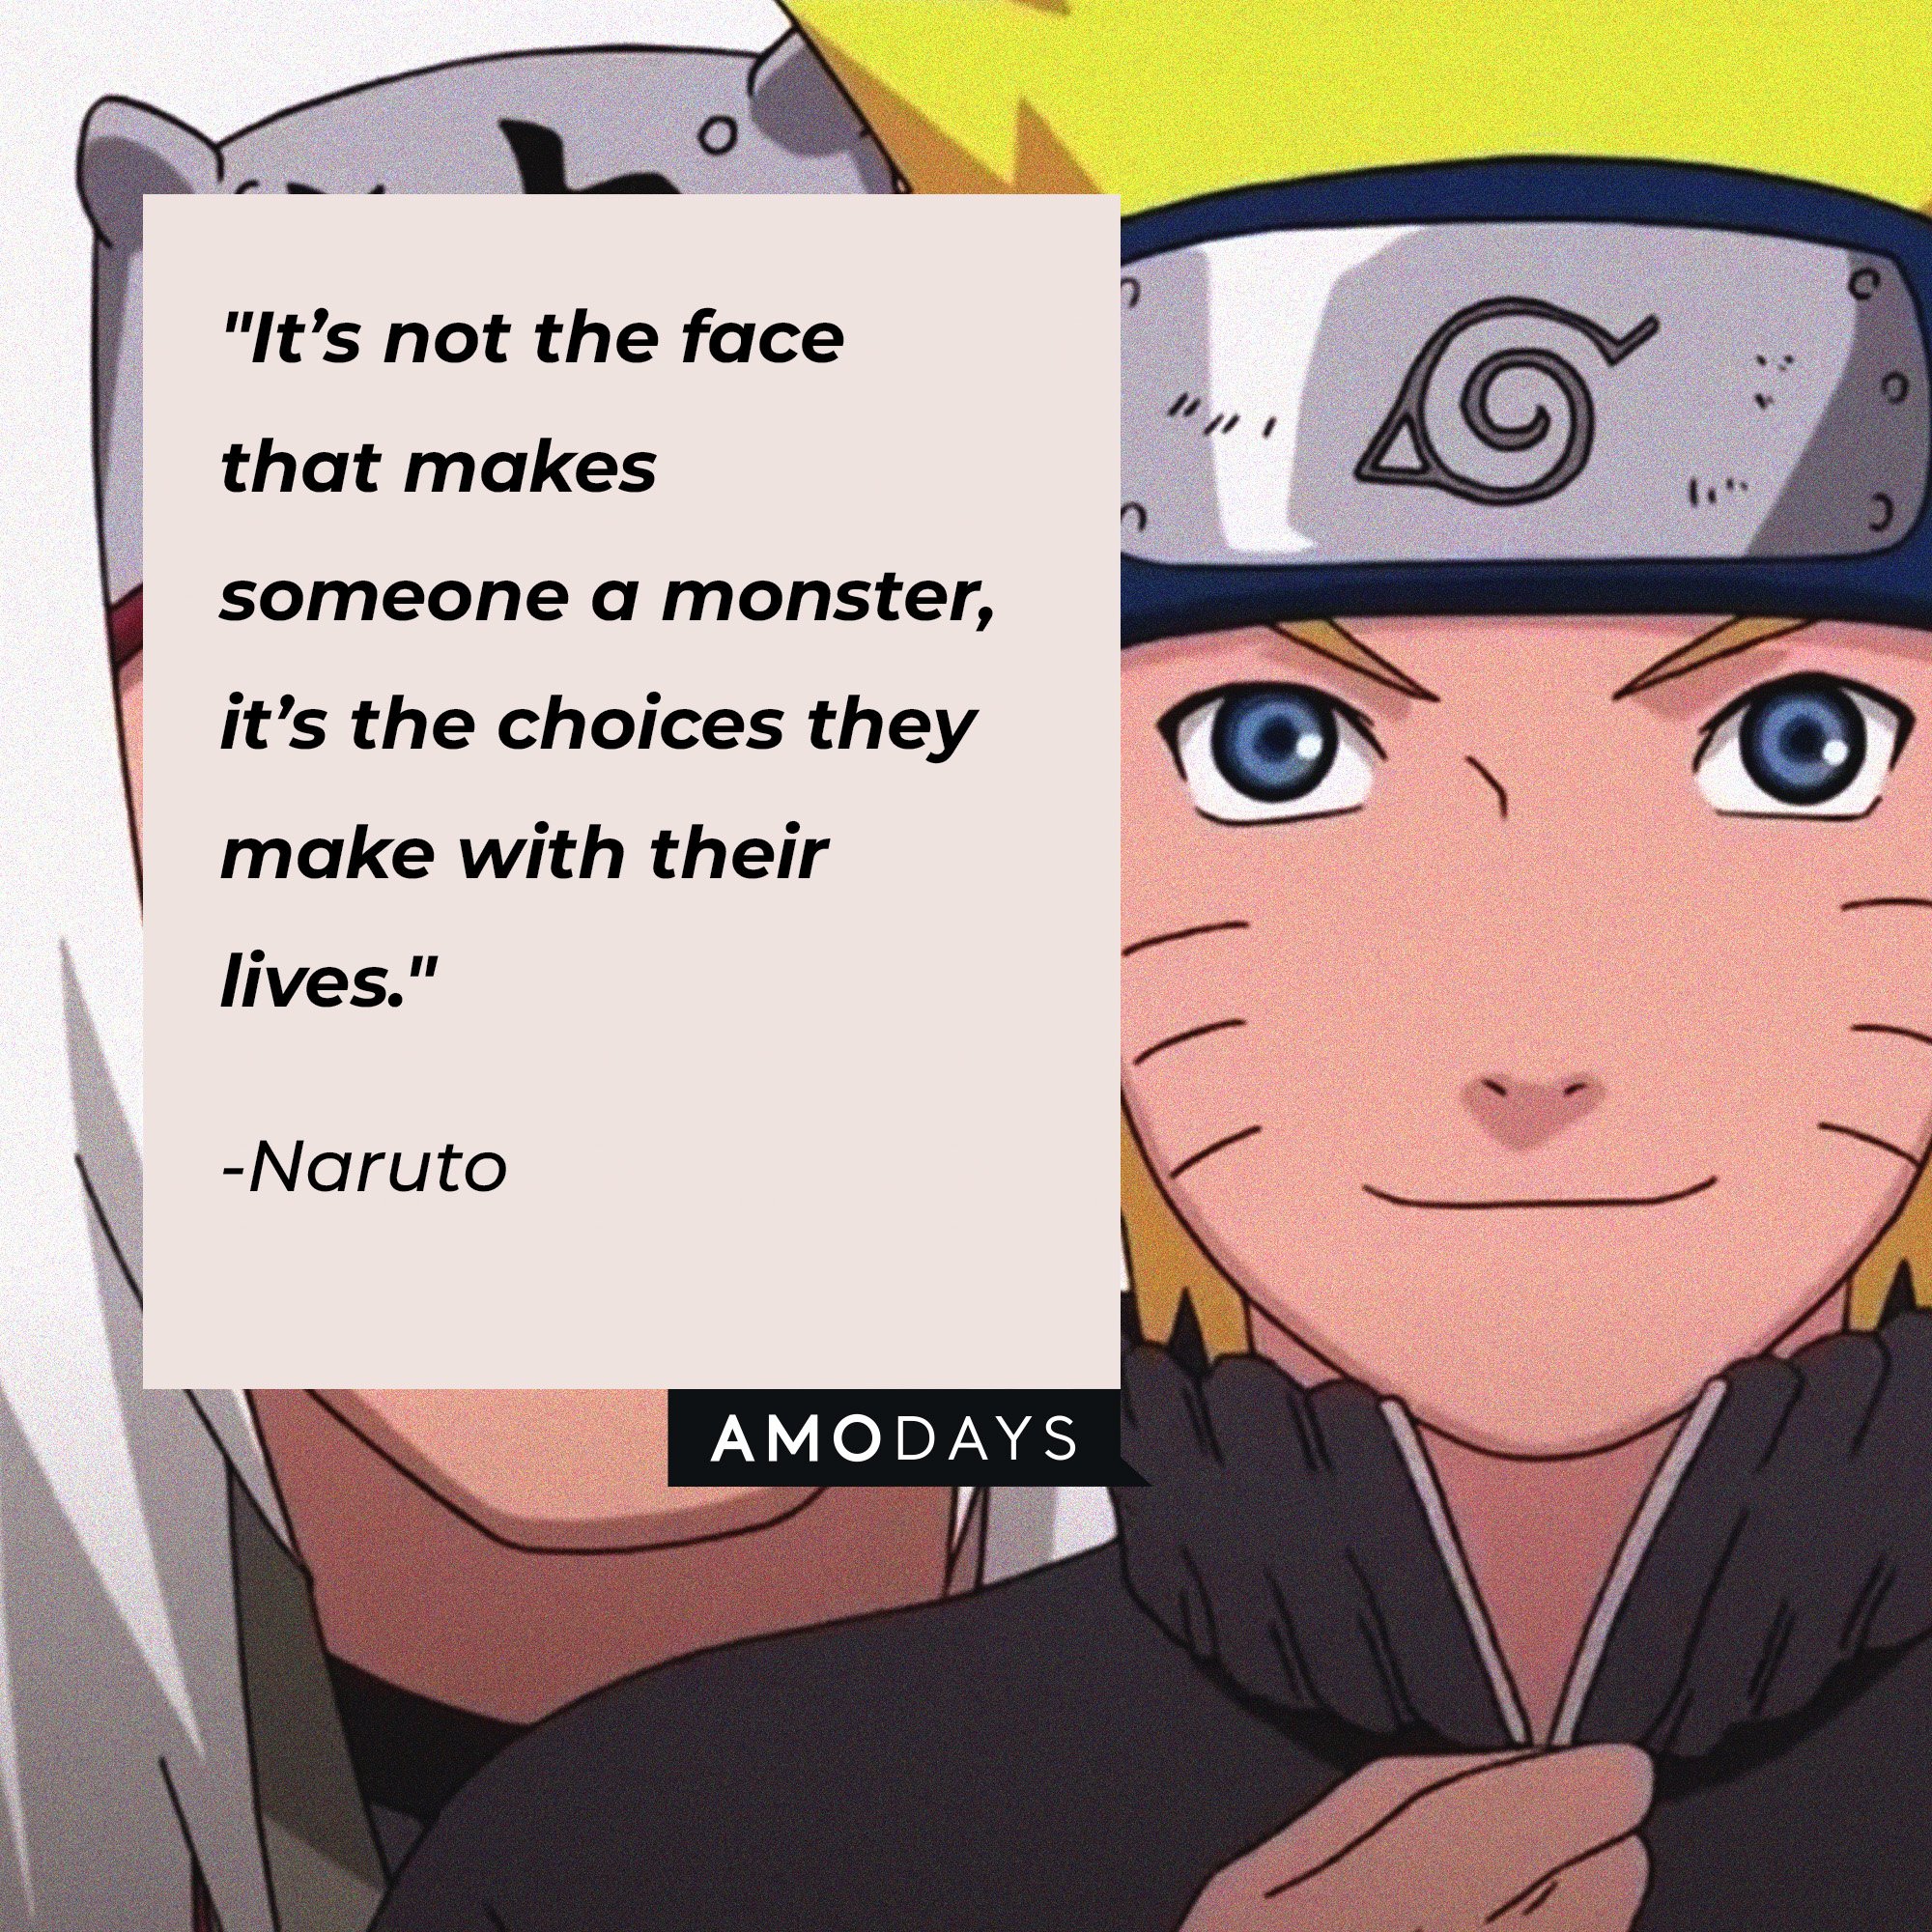 Naruto's quote: "It’s not the face that makes someone a monster, it’s the choices they make with their lives." | Image: AmoDays